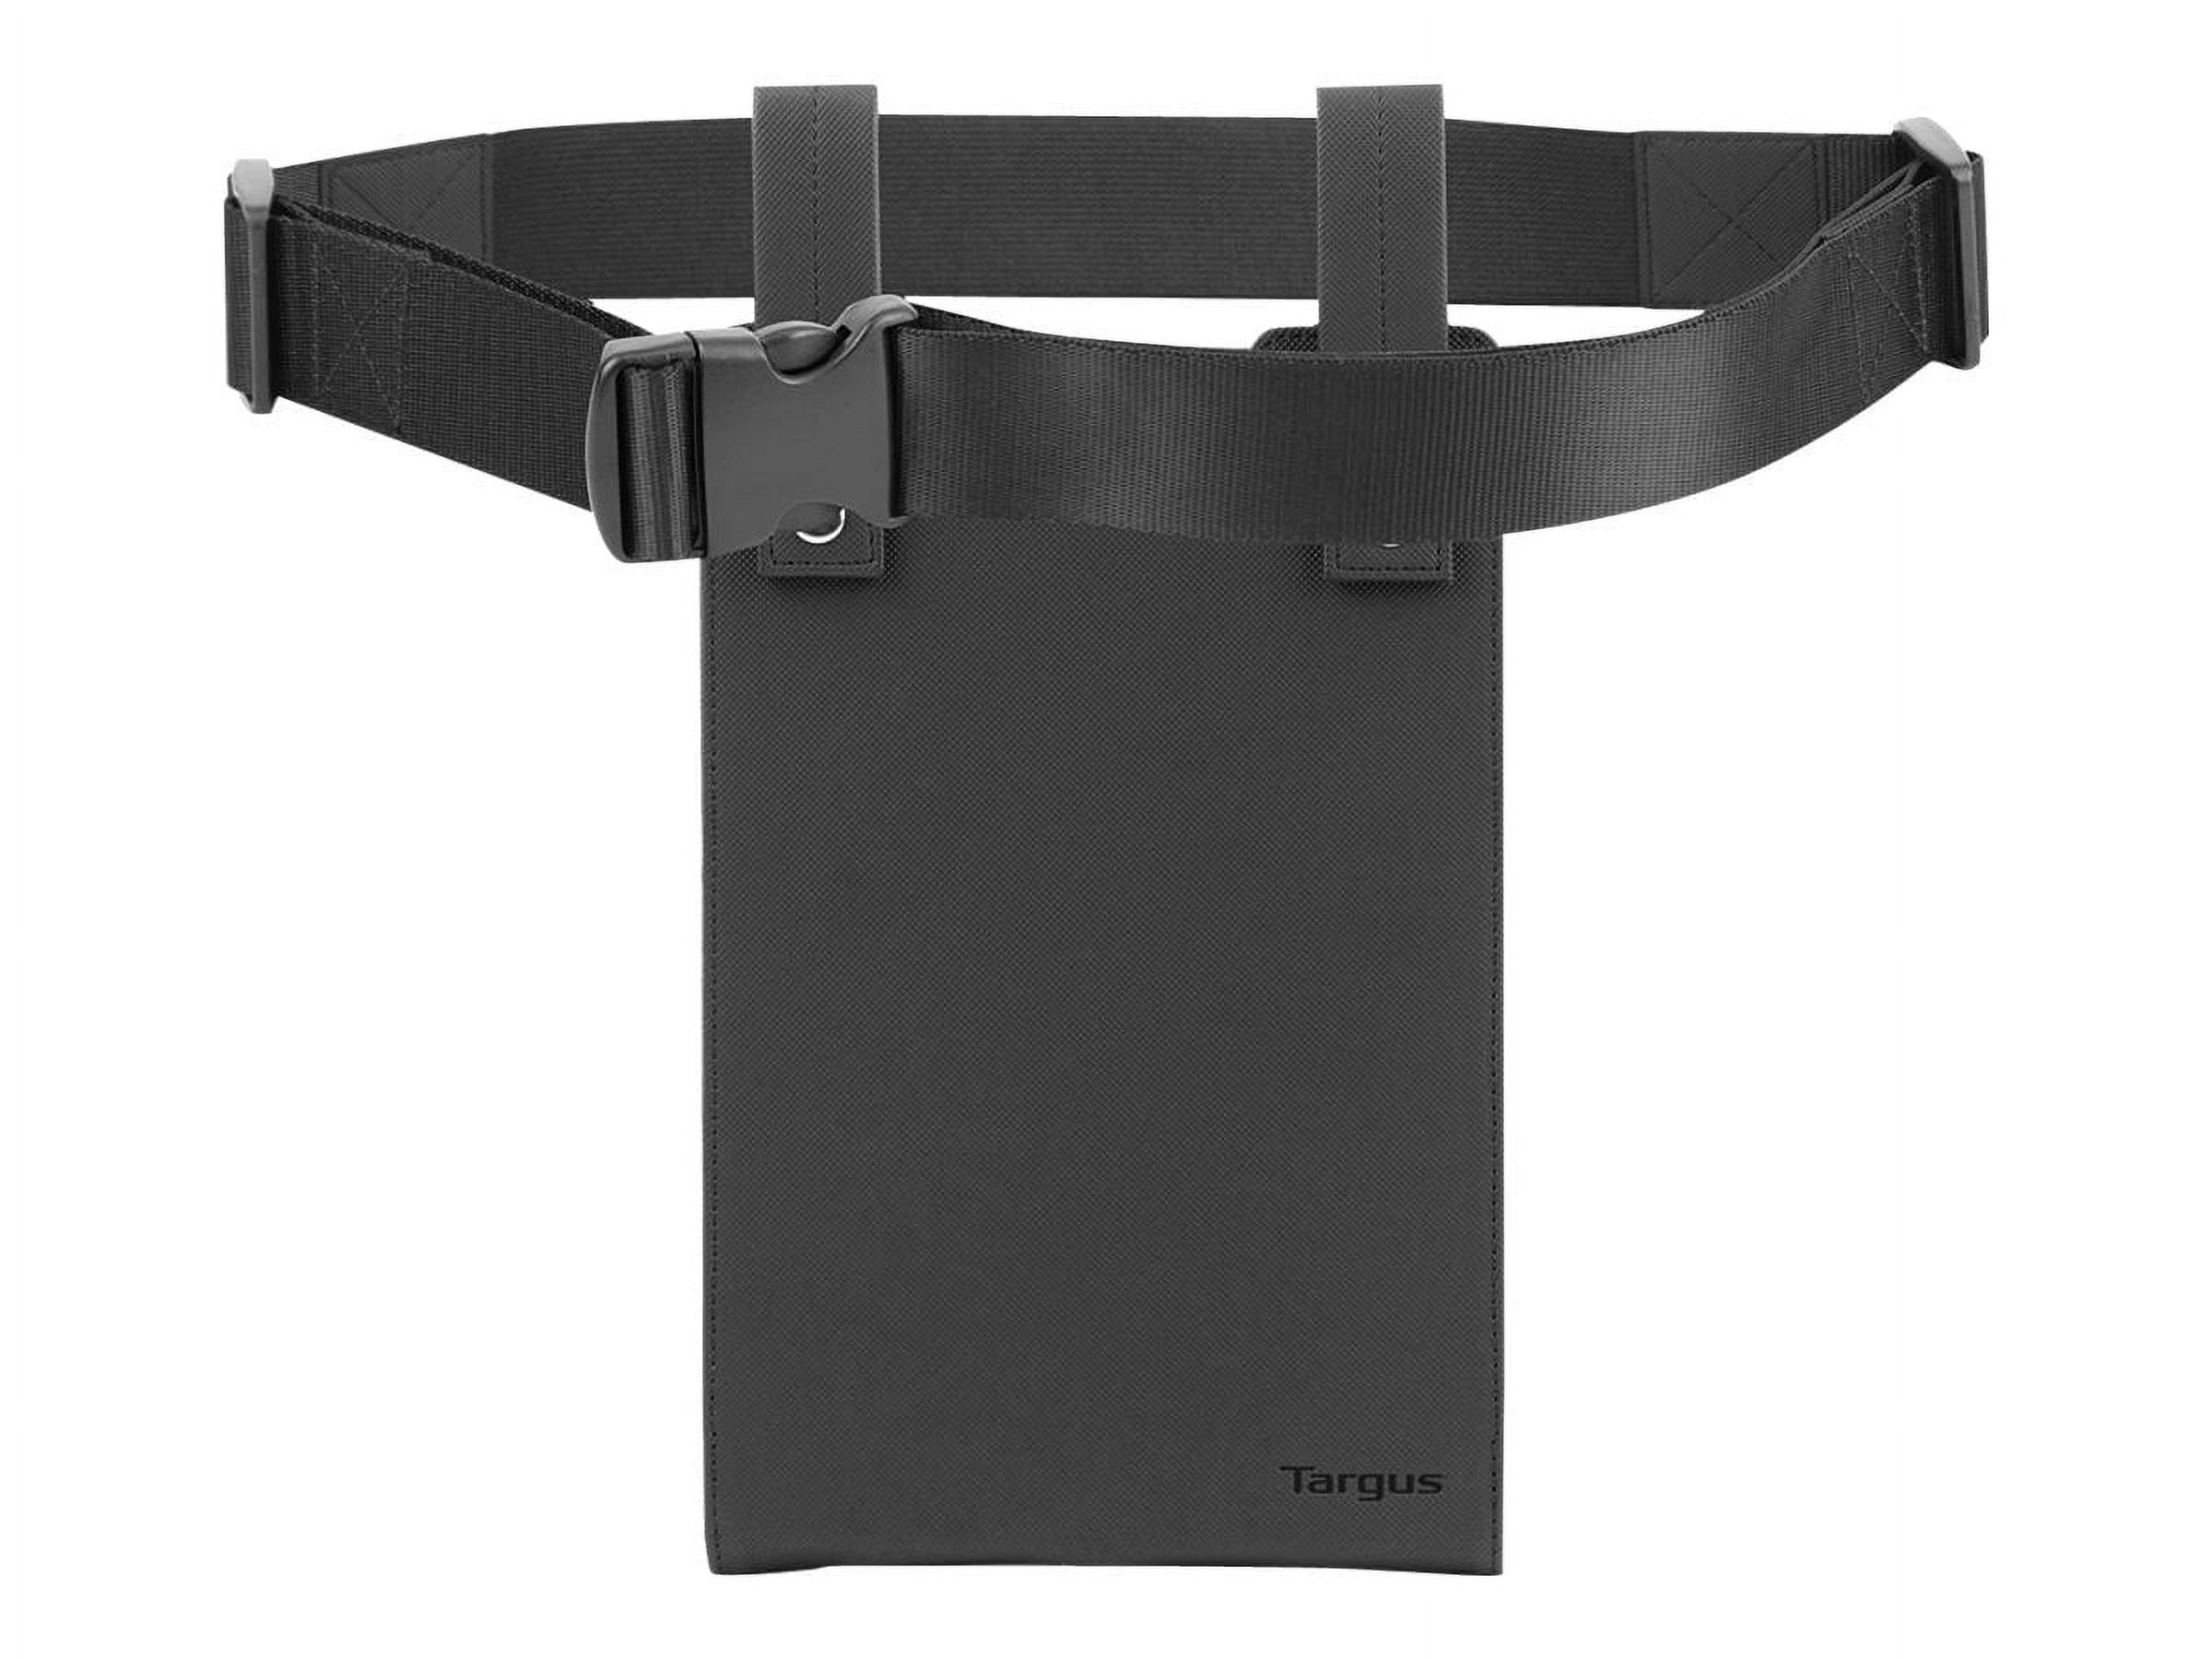 Targus THD474GLZ Carrying Case (Holster) for 8" Tablet, Black - image 5 of 11